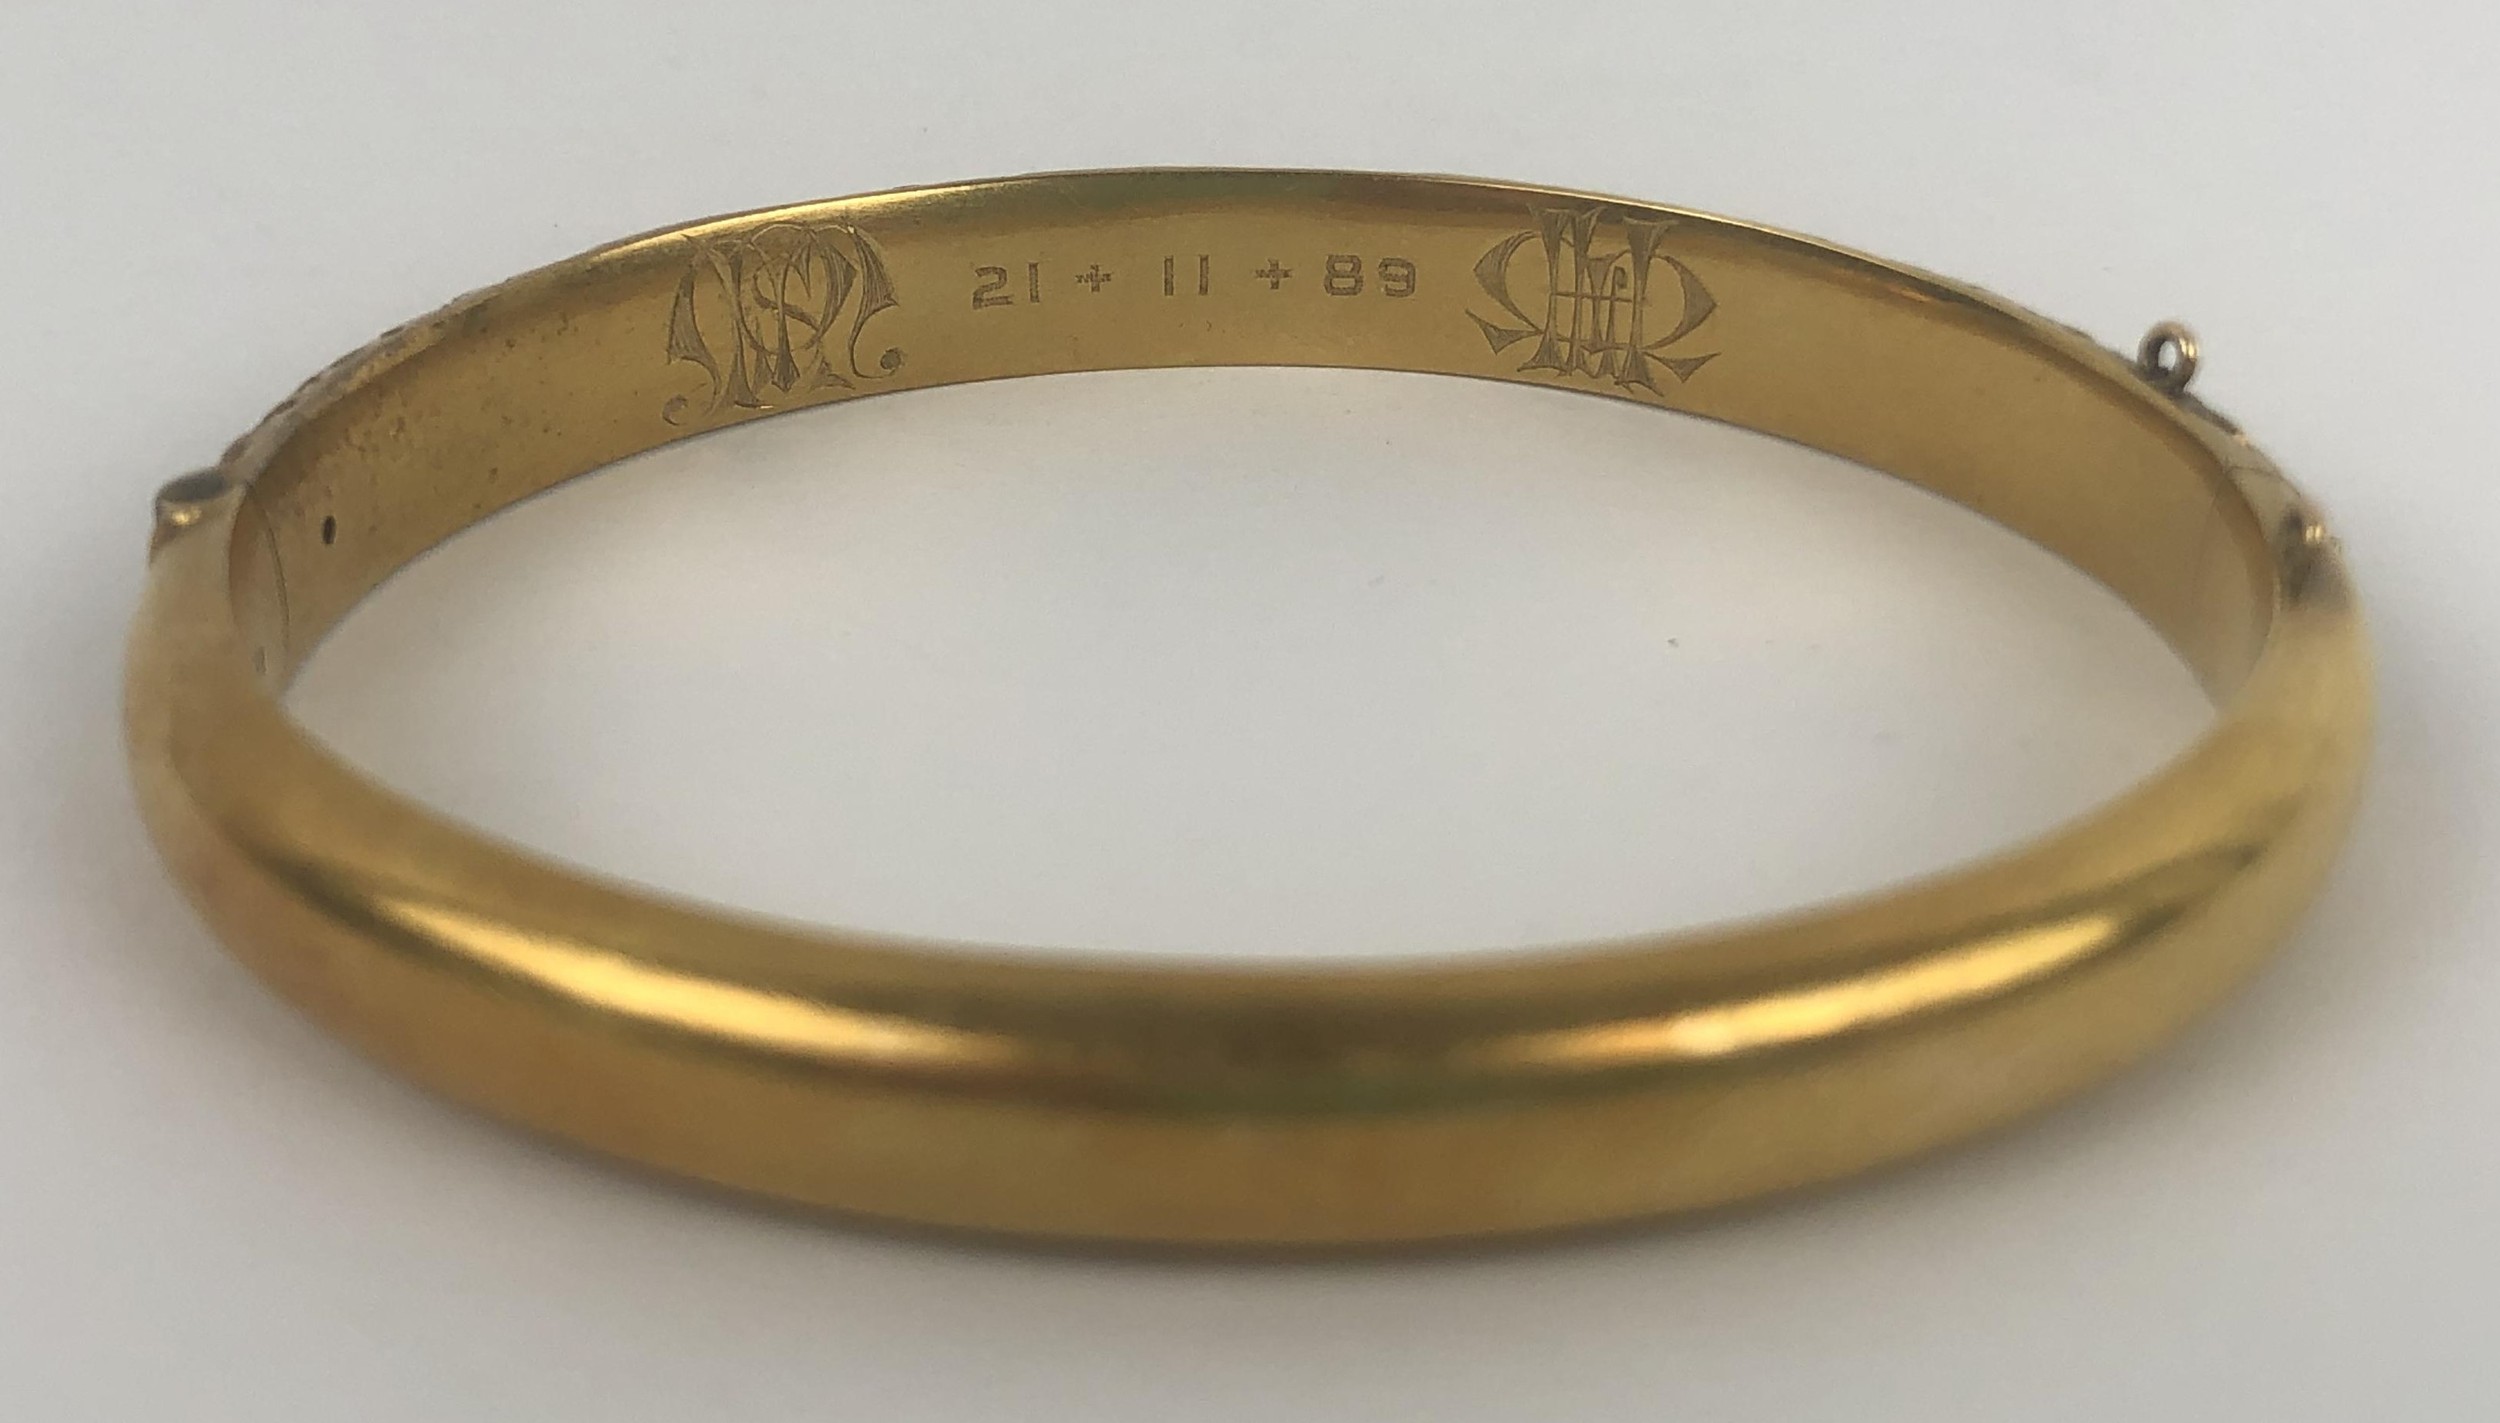 A Victorian 15ct gold hinged bangle, engraved with two sets of monogrammes and dated 21 11 89, 12. - Image 2 of 7